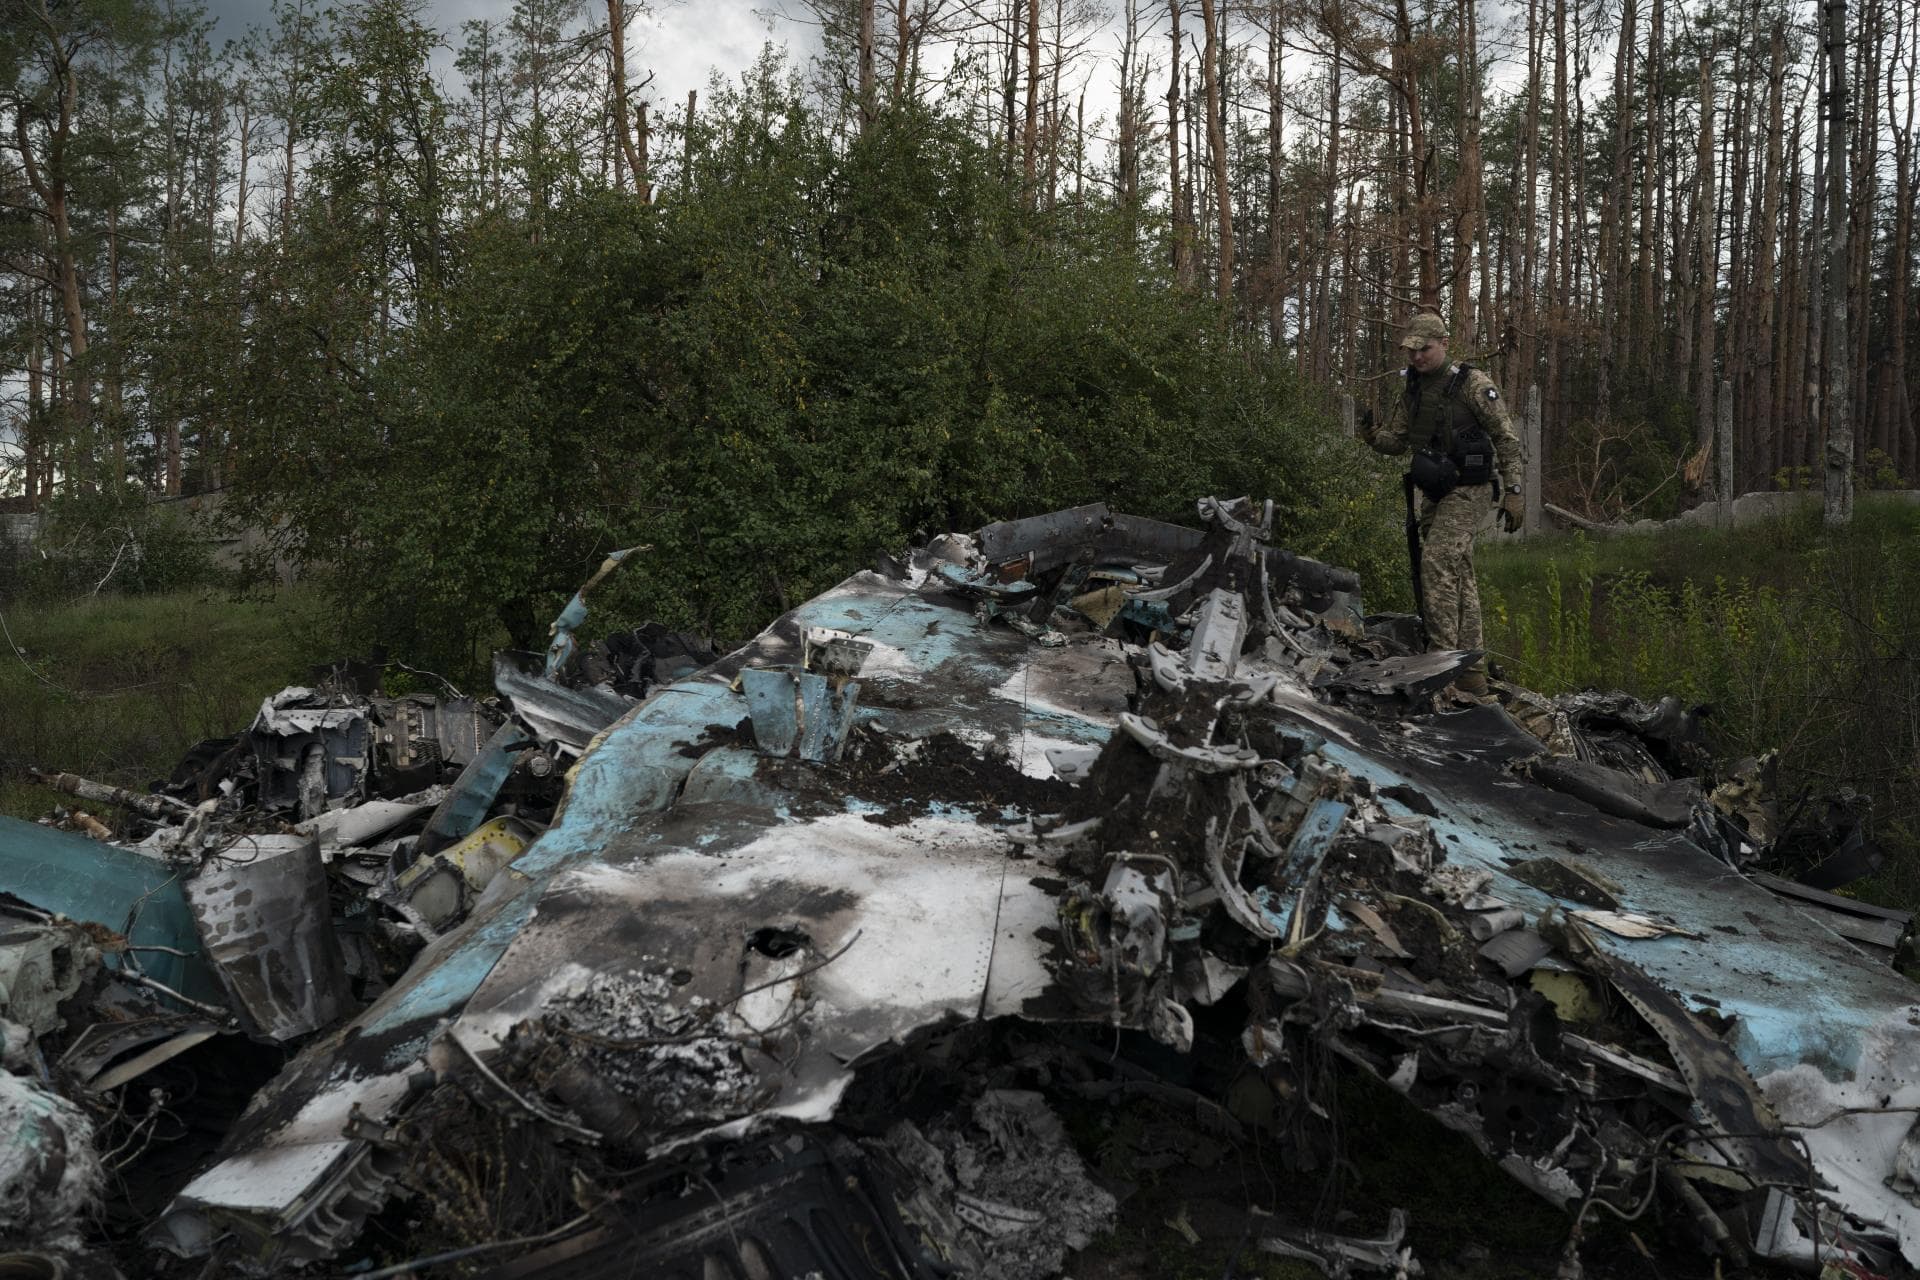 A Ukrainian serviceman walks over the remains of Russian aircraft SU-34 in an area at the recaptured town of Lyman